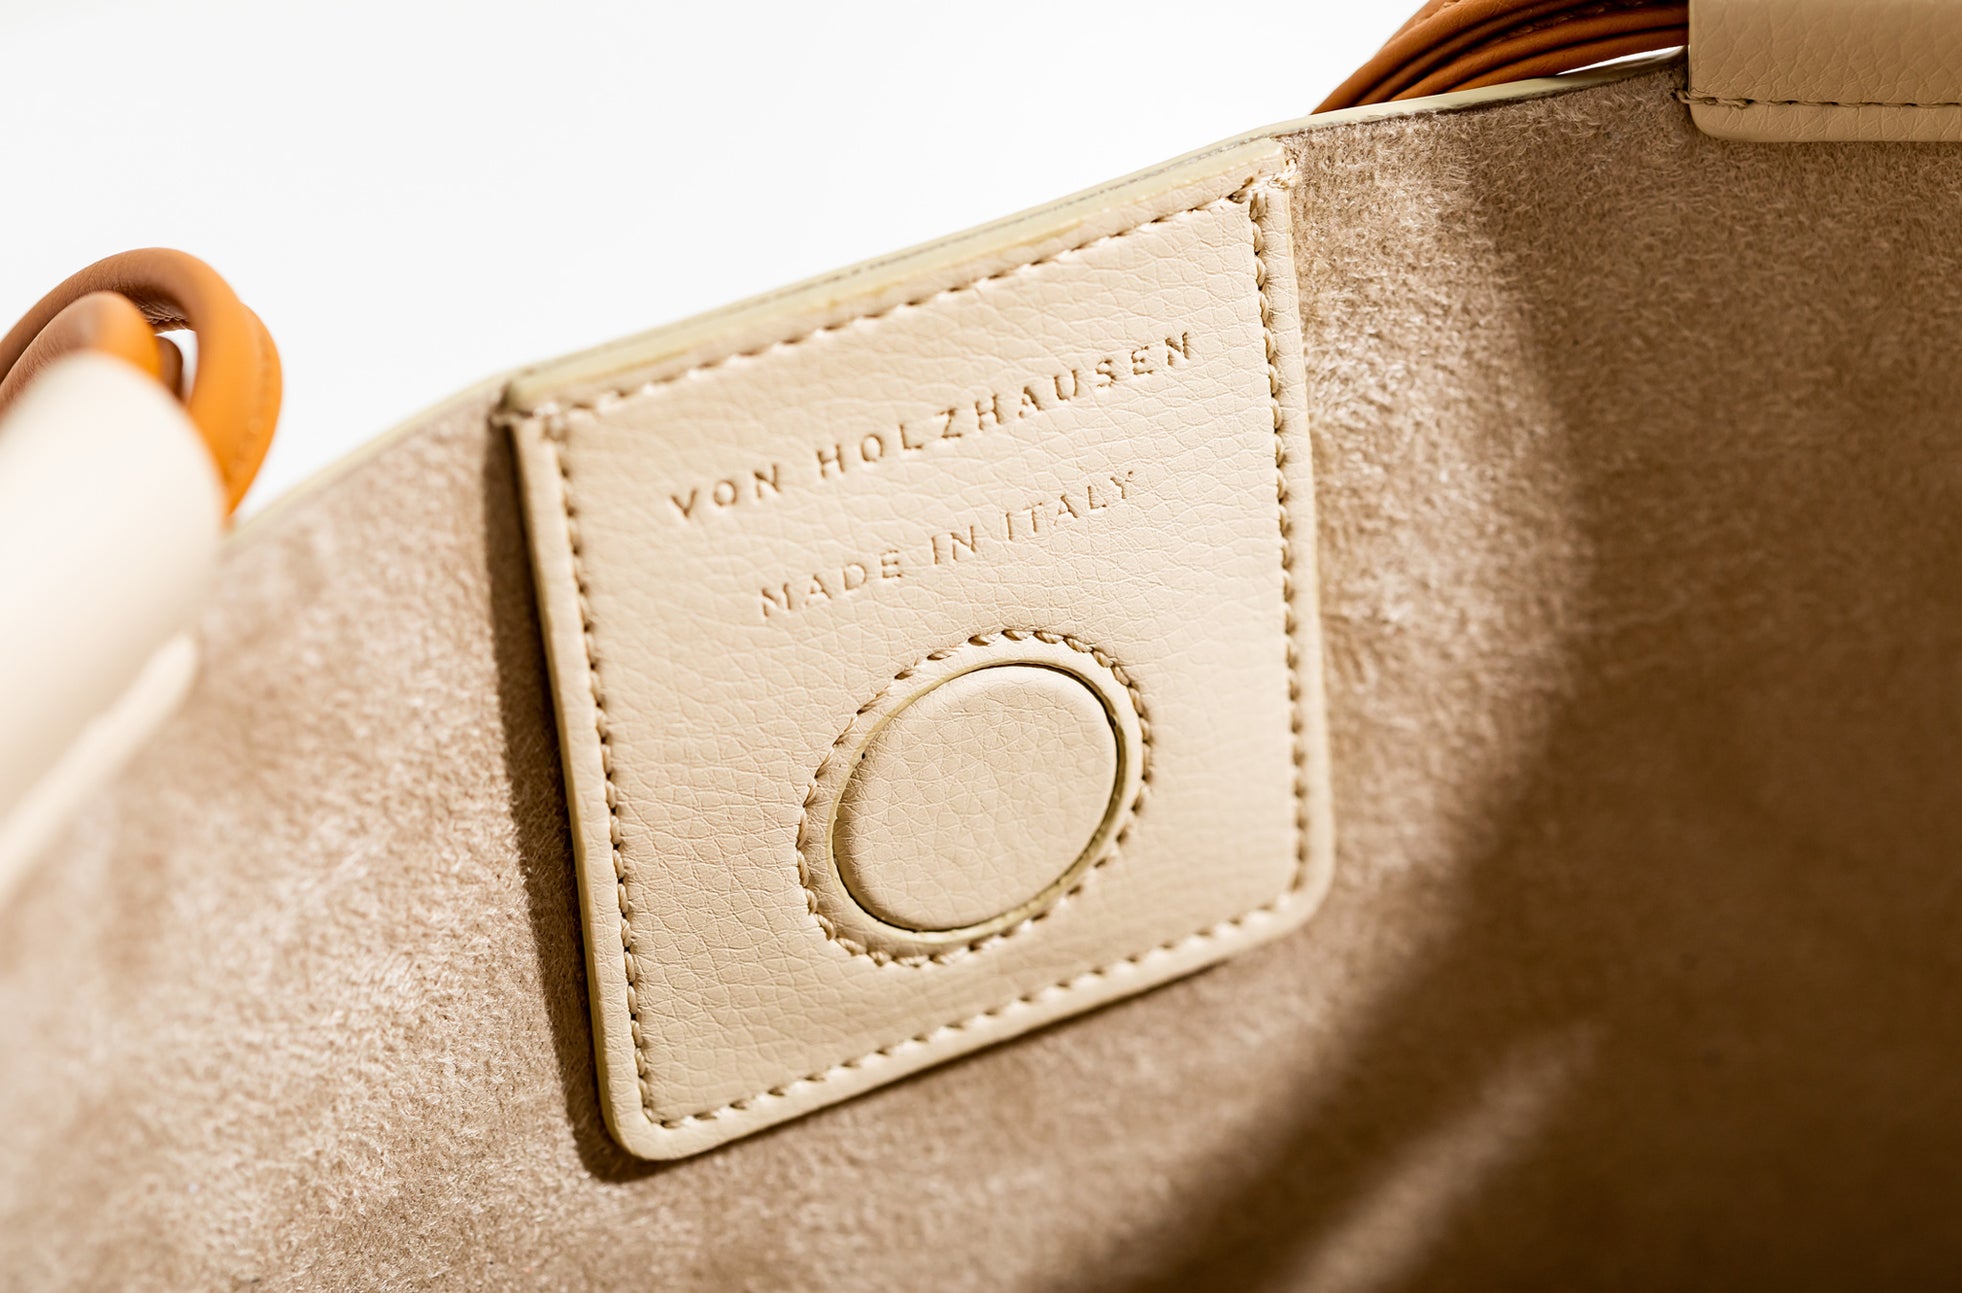 The Market Tote in Technik-Leather in Oat and Caramel image 4